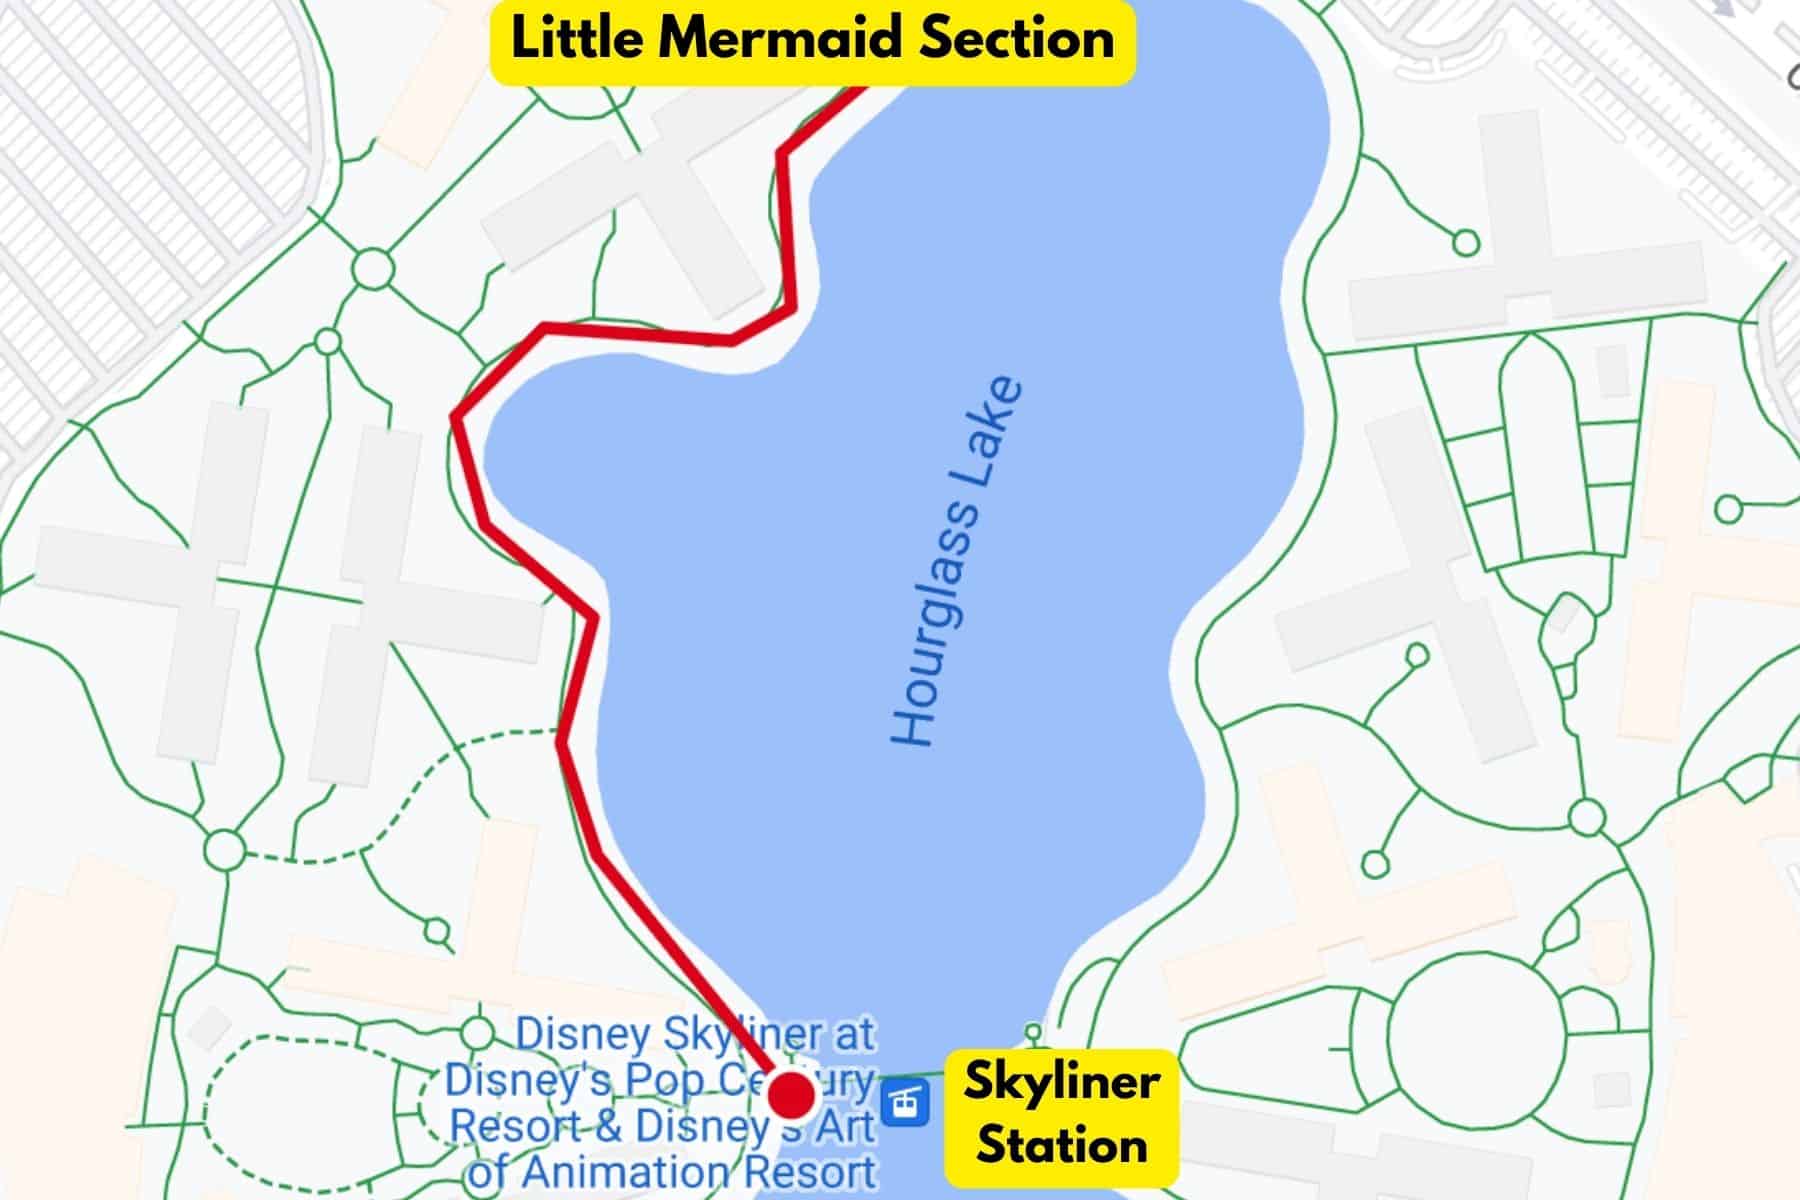 a map that shows the walking distance from the Disney Skyliner Station to the Little Mermaid section